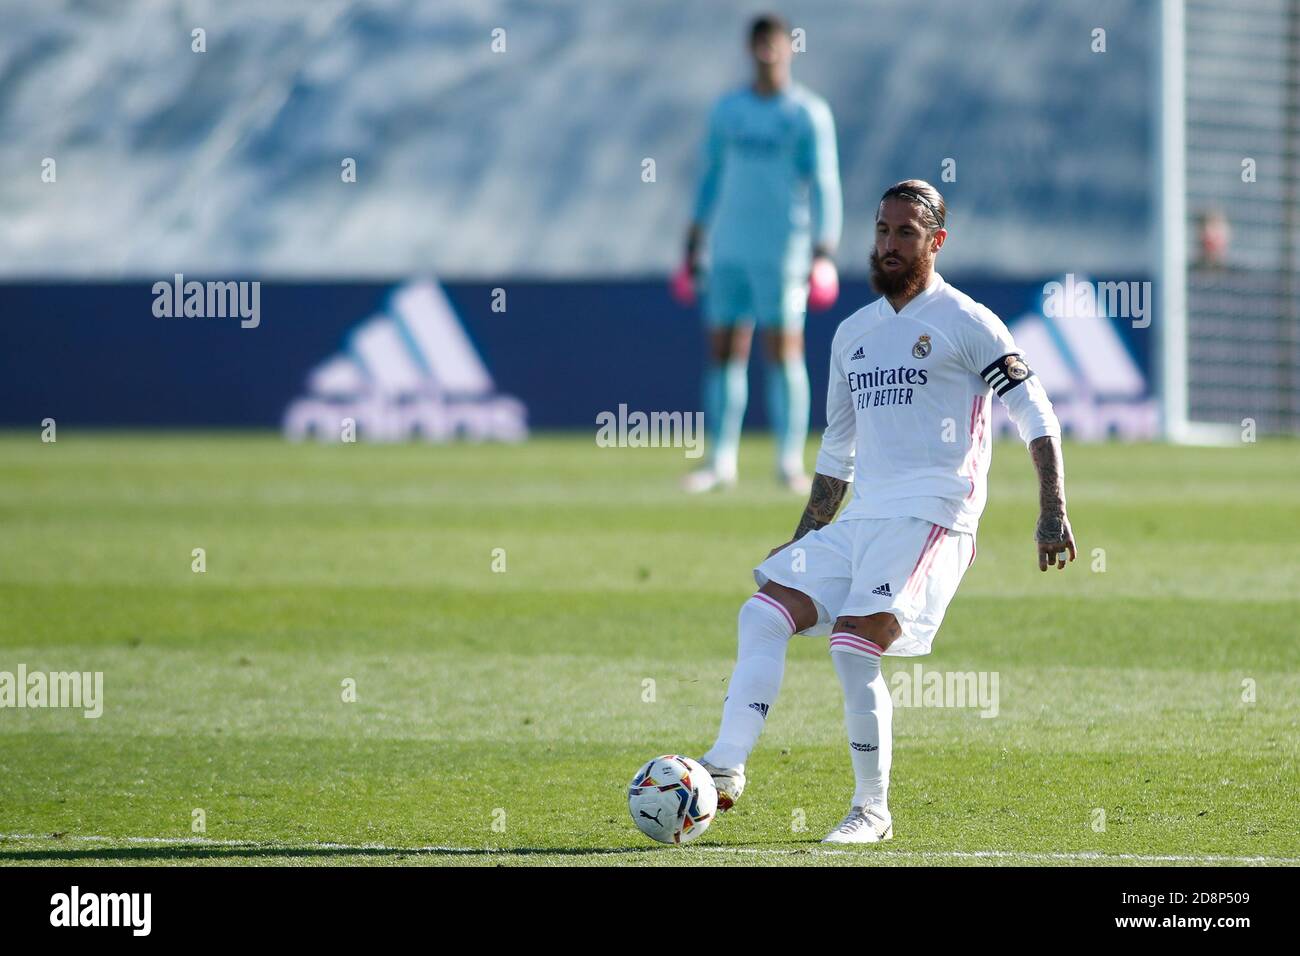 Madrid, Spain. 31st October, 2020. Sergio Ramos of Real Madrid in action during the Spanish championship La Liga football match between Real Madrid and SD Huesca on October 31, 2020 at Alfredo Di Stefano stadium in Valdebebas, Madrid, Spain - Photo Oscar J Barroso / Spain DPPI / DPPI Credit: LM/DPPI/Oscar Barroso/Alamy Live News Stock Photo